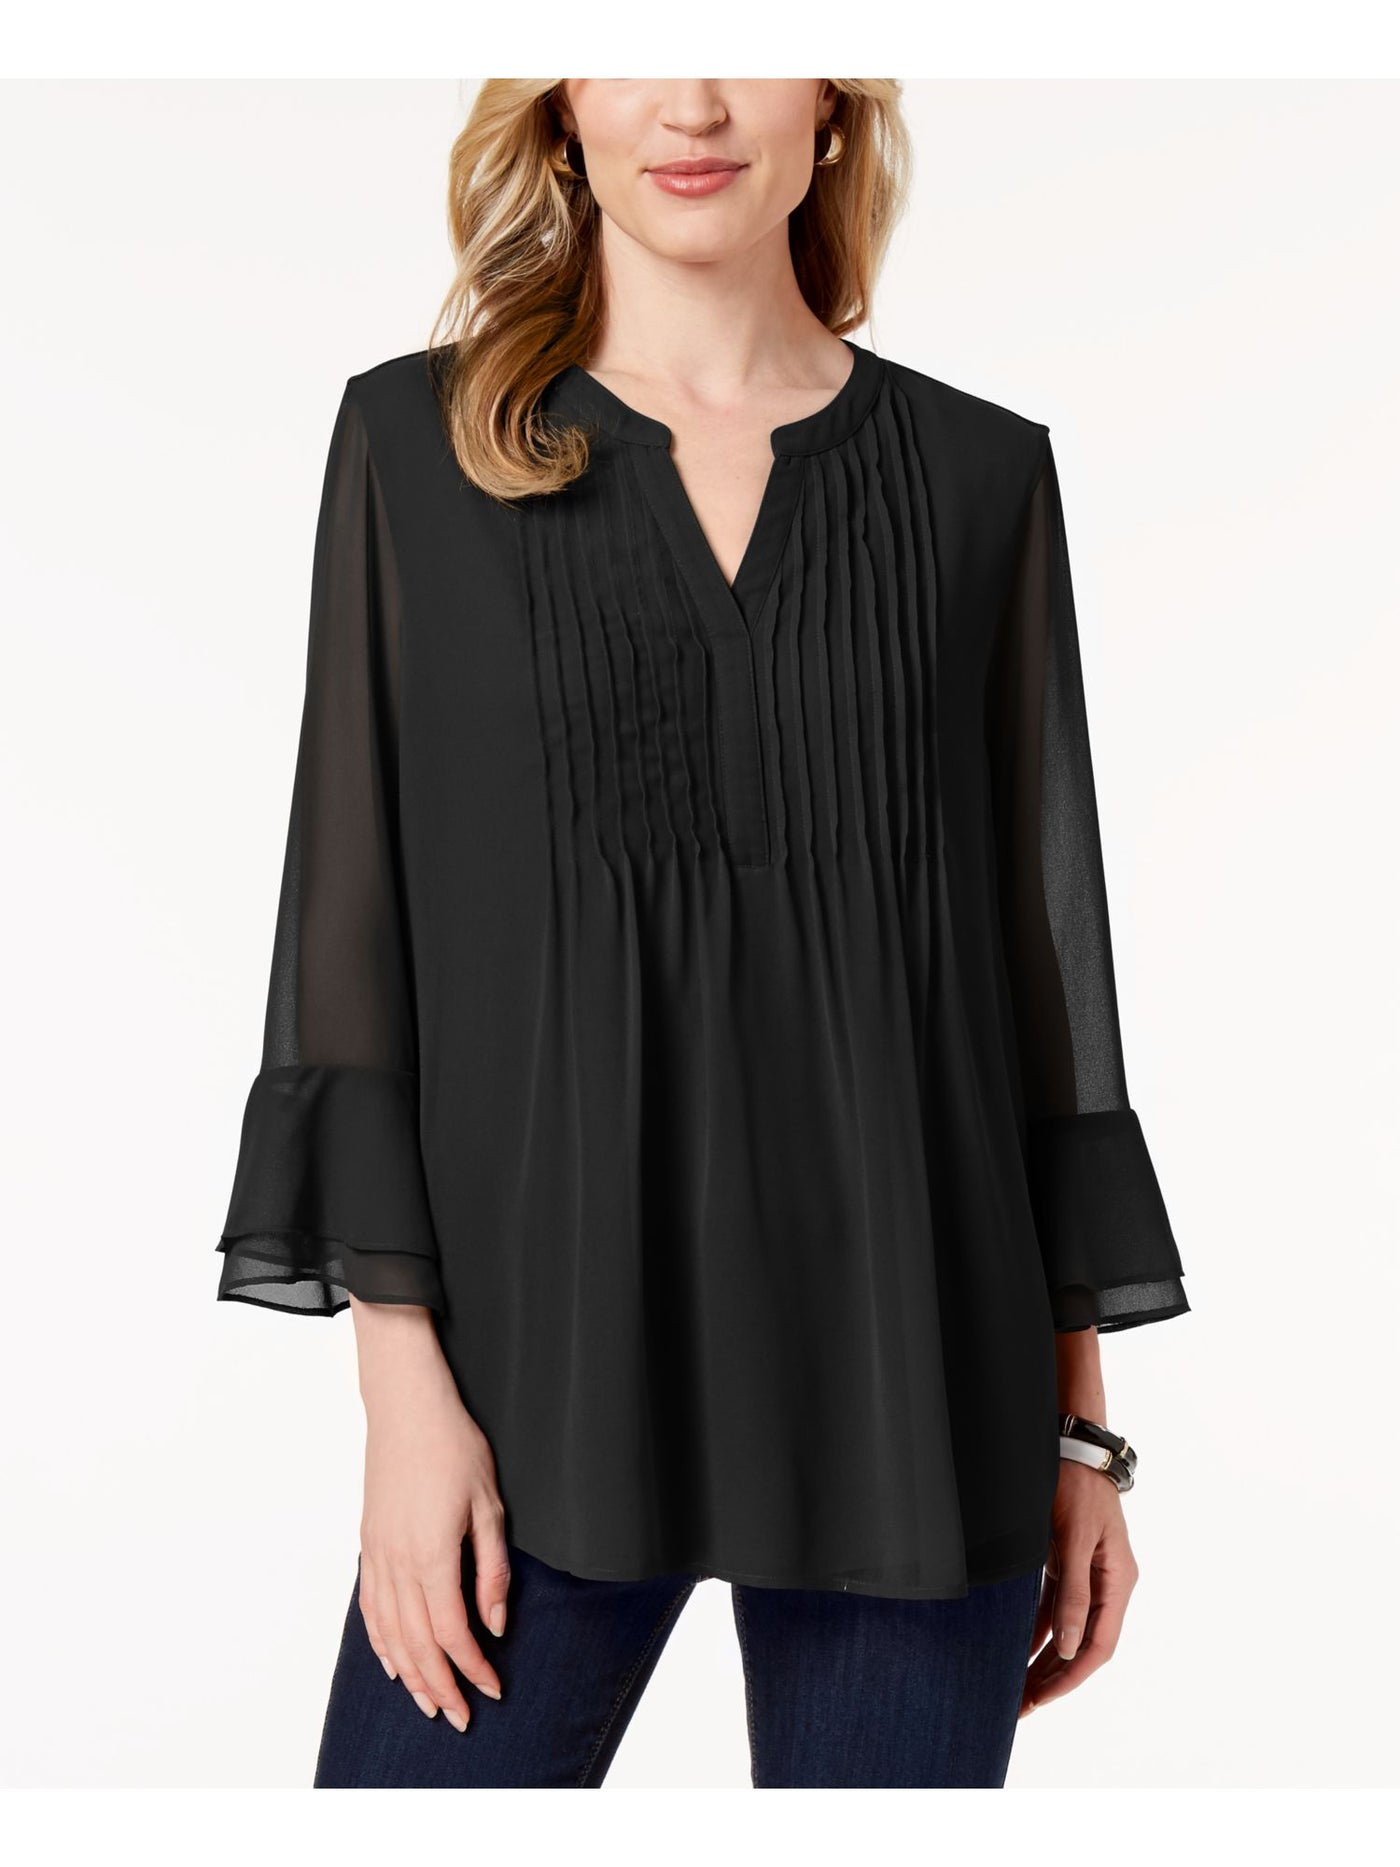 CHARTER CLUB Womens Black Ruffled Textured Relaxed Fit; Pintucks, Lined 3/4 Sleeve Split Wear To Work Blouse XS